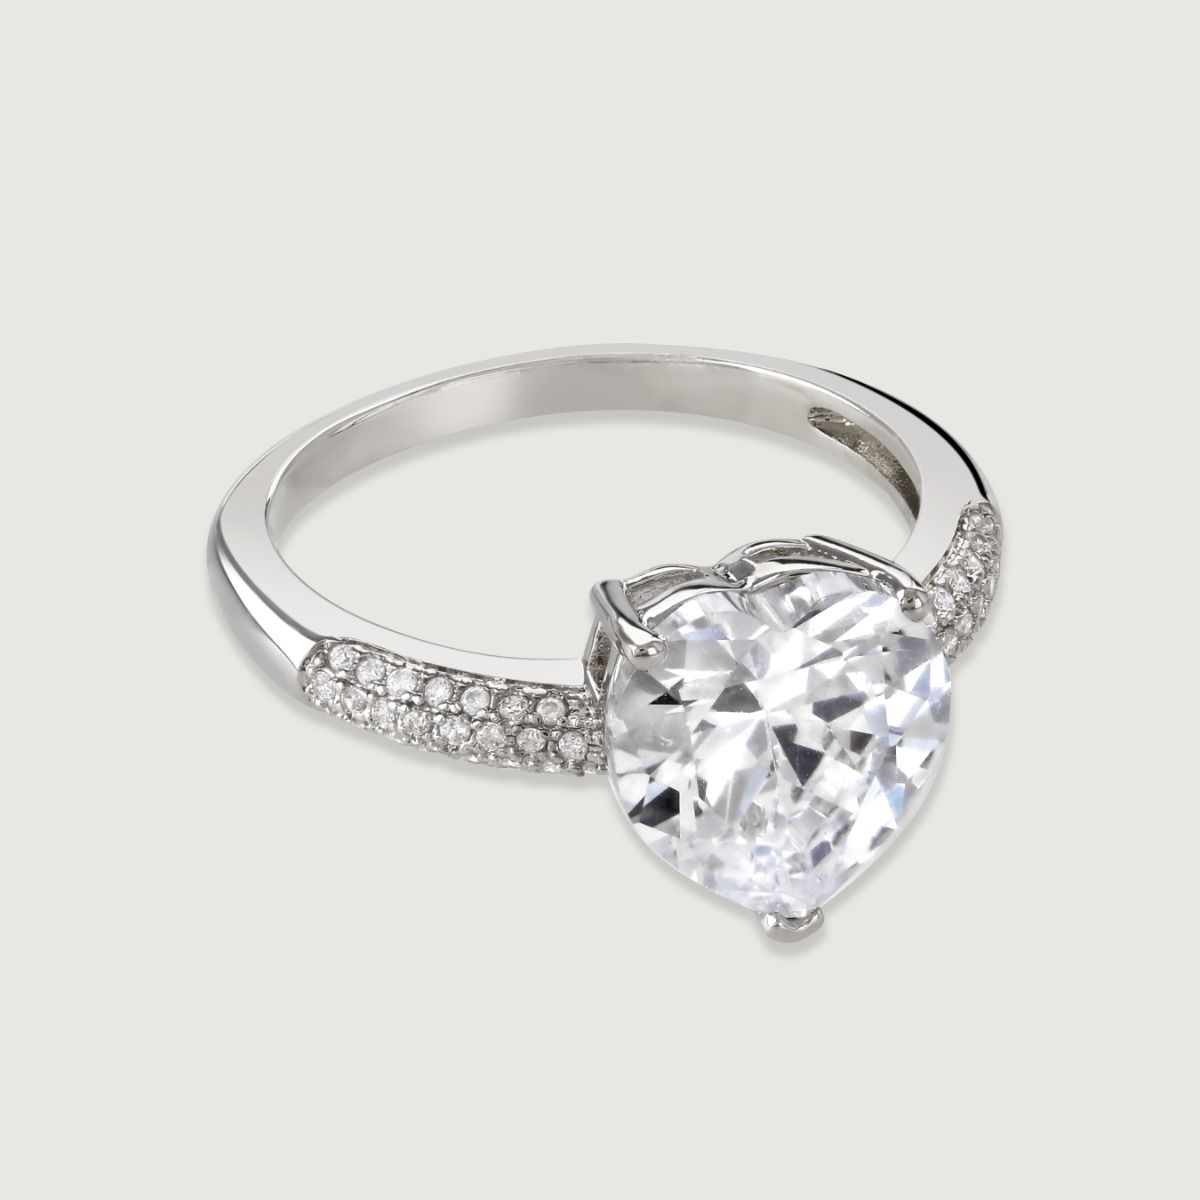 A truly stunning trinity ring featuring a trio of brilliant cut cubic zirconia stones flawlessly faceted to reflect the light for diamond inspired look. This beautiful ring brings eye catching elegance to every occasion.